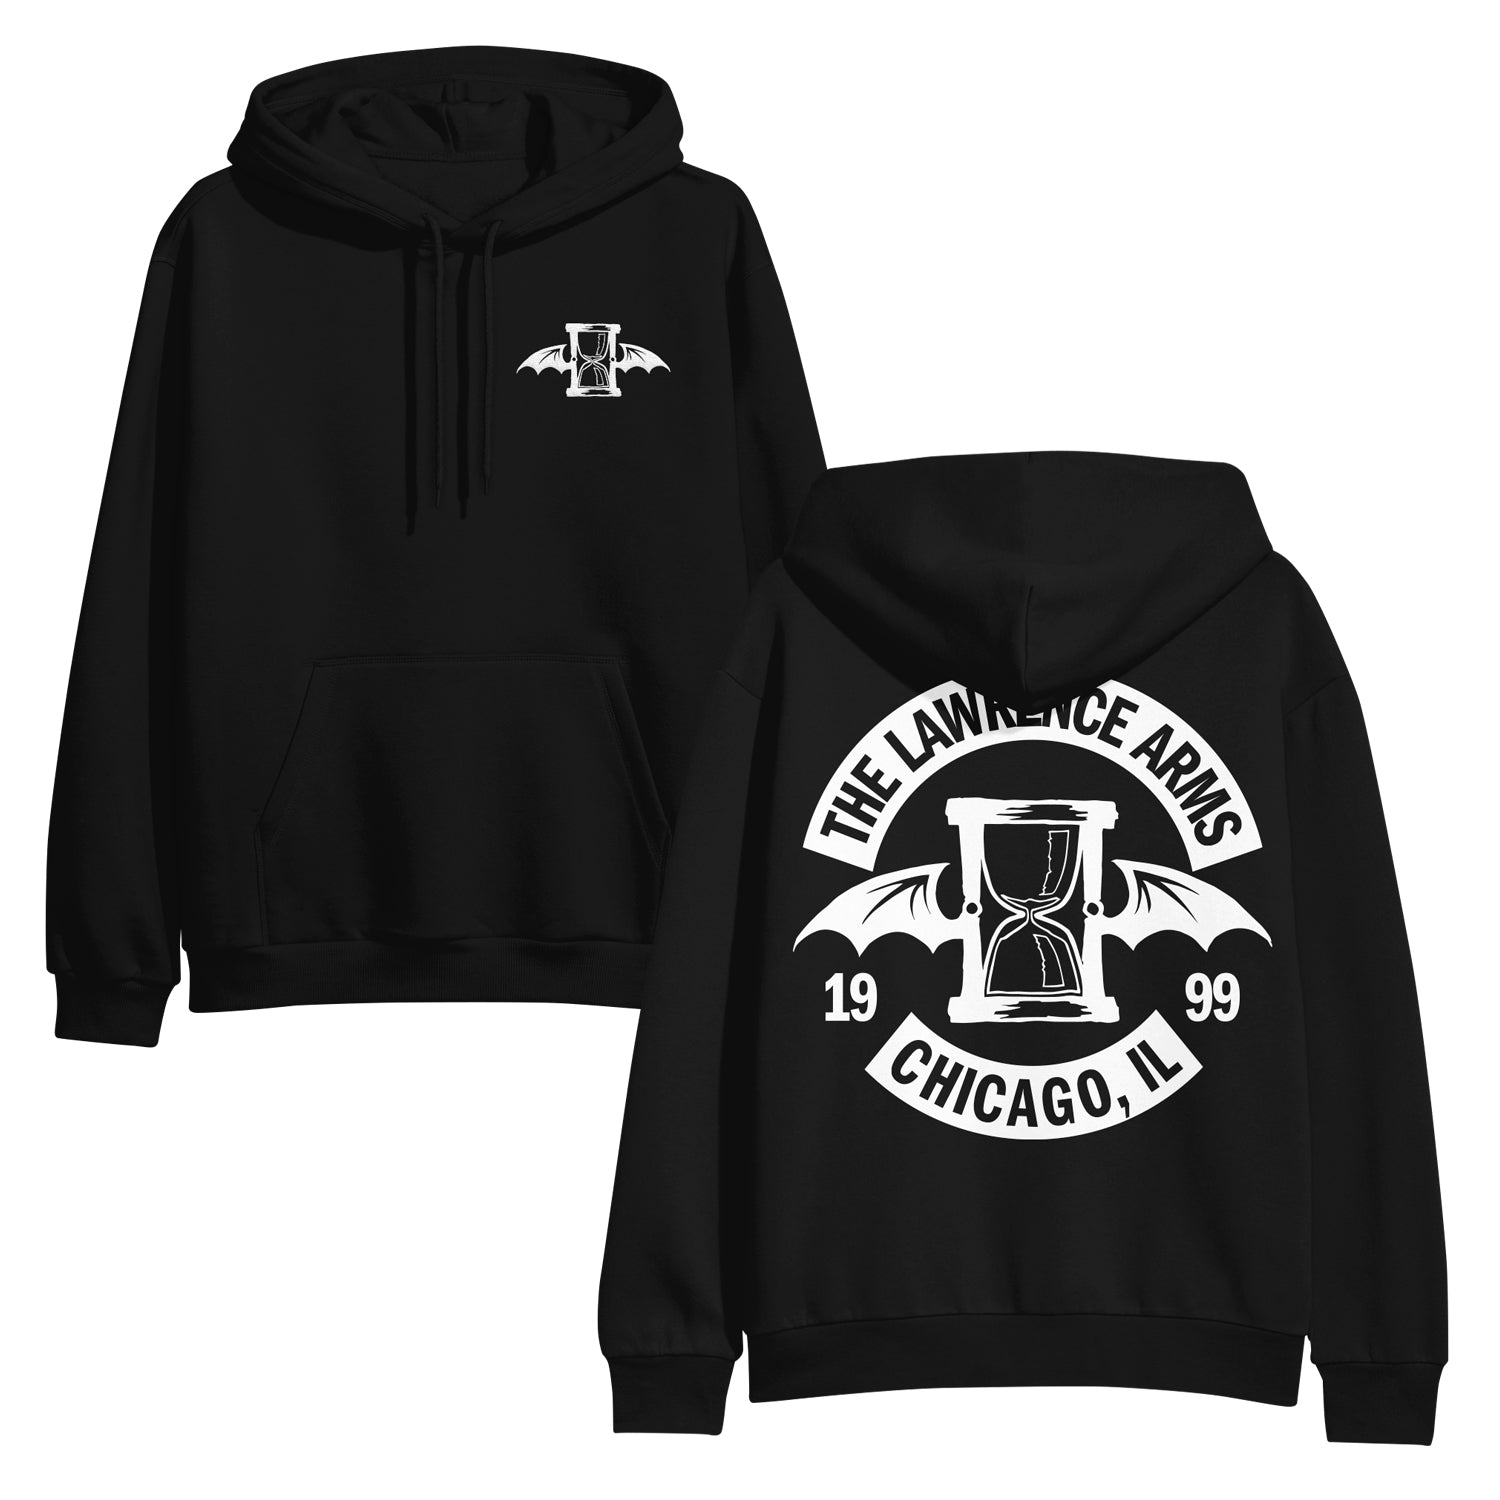 image of the front and back of a black pullover hooded sweatshirt on a white background. the front of the hoodie is on the left and has a small white embroidered right chest design of an hourglass with bat wings. the back of the hoodie is on the right and has a full back print in white of the hourglass with bat wings. arched above that says the lawrence arms, and arched up below says chicago, IL